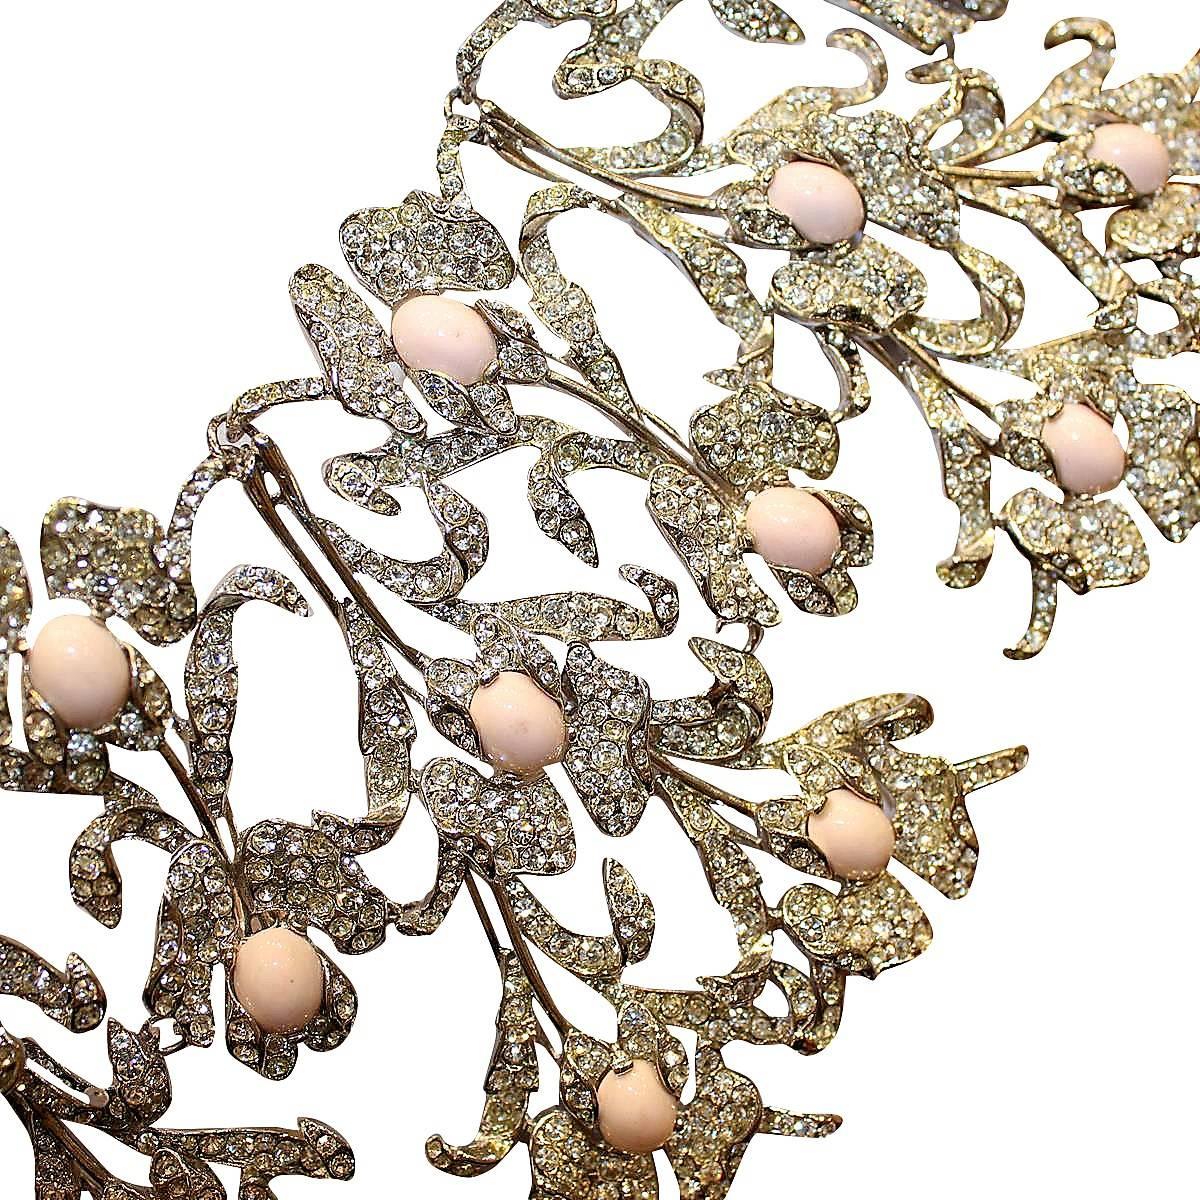 Fantastic masterpiece by Carlo Zini
One of theworld greatest bijoux designers
Large collier
Floral ramage
Swarovsky crystals
Mervellous creation of faux corals peau d'ange / boké
100% Artisanal work
Unique piece !
Worldwide express shipping included